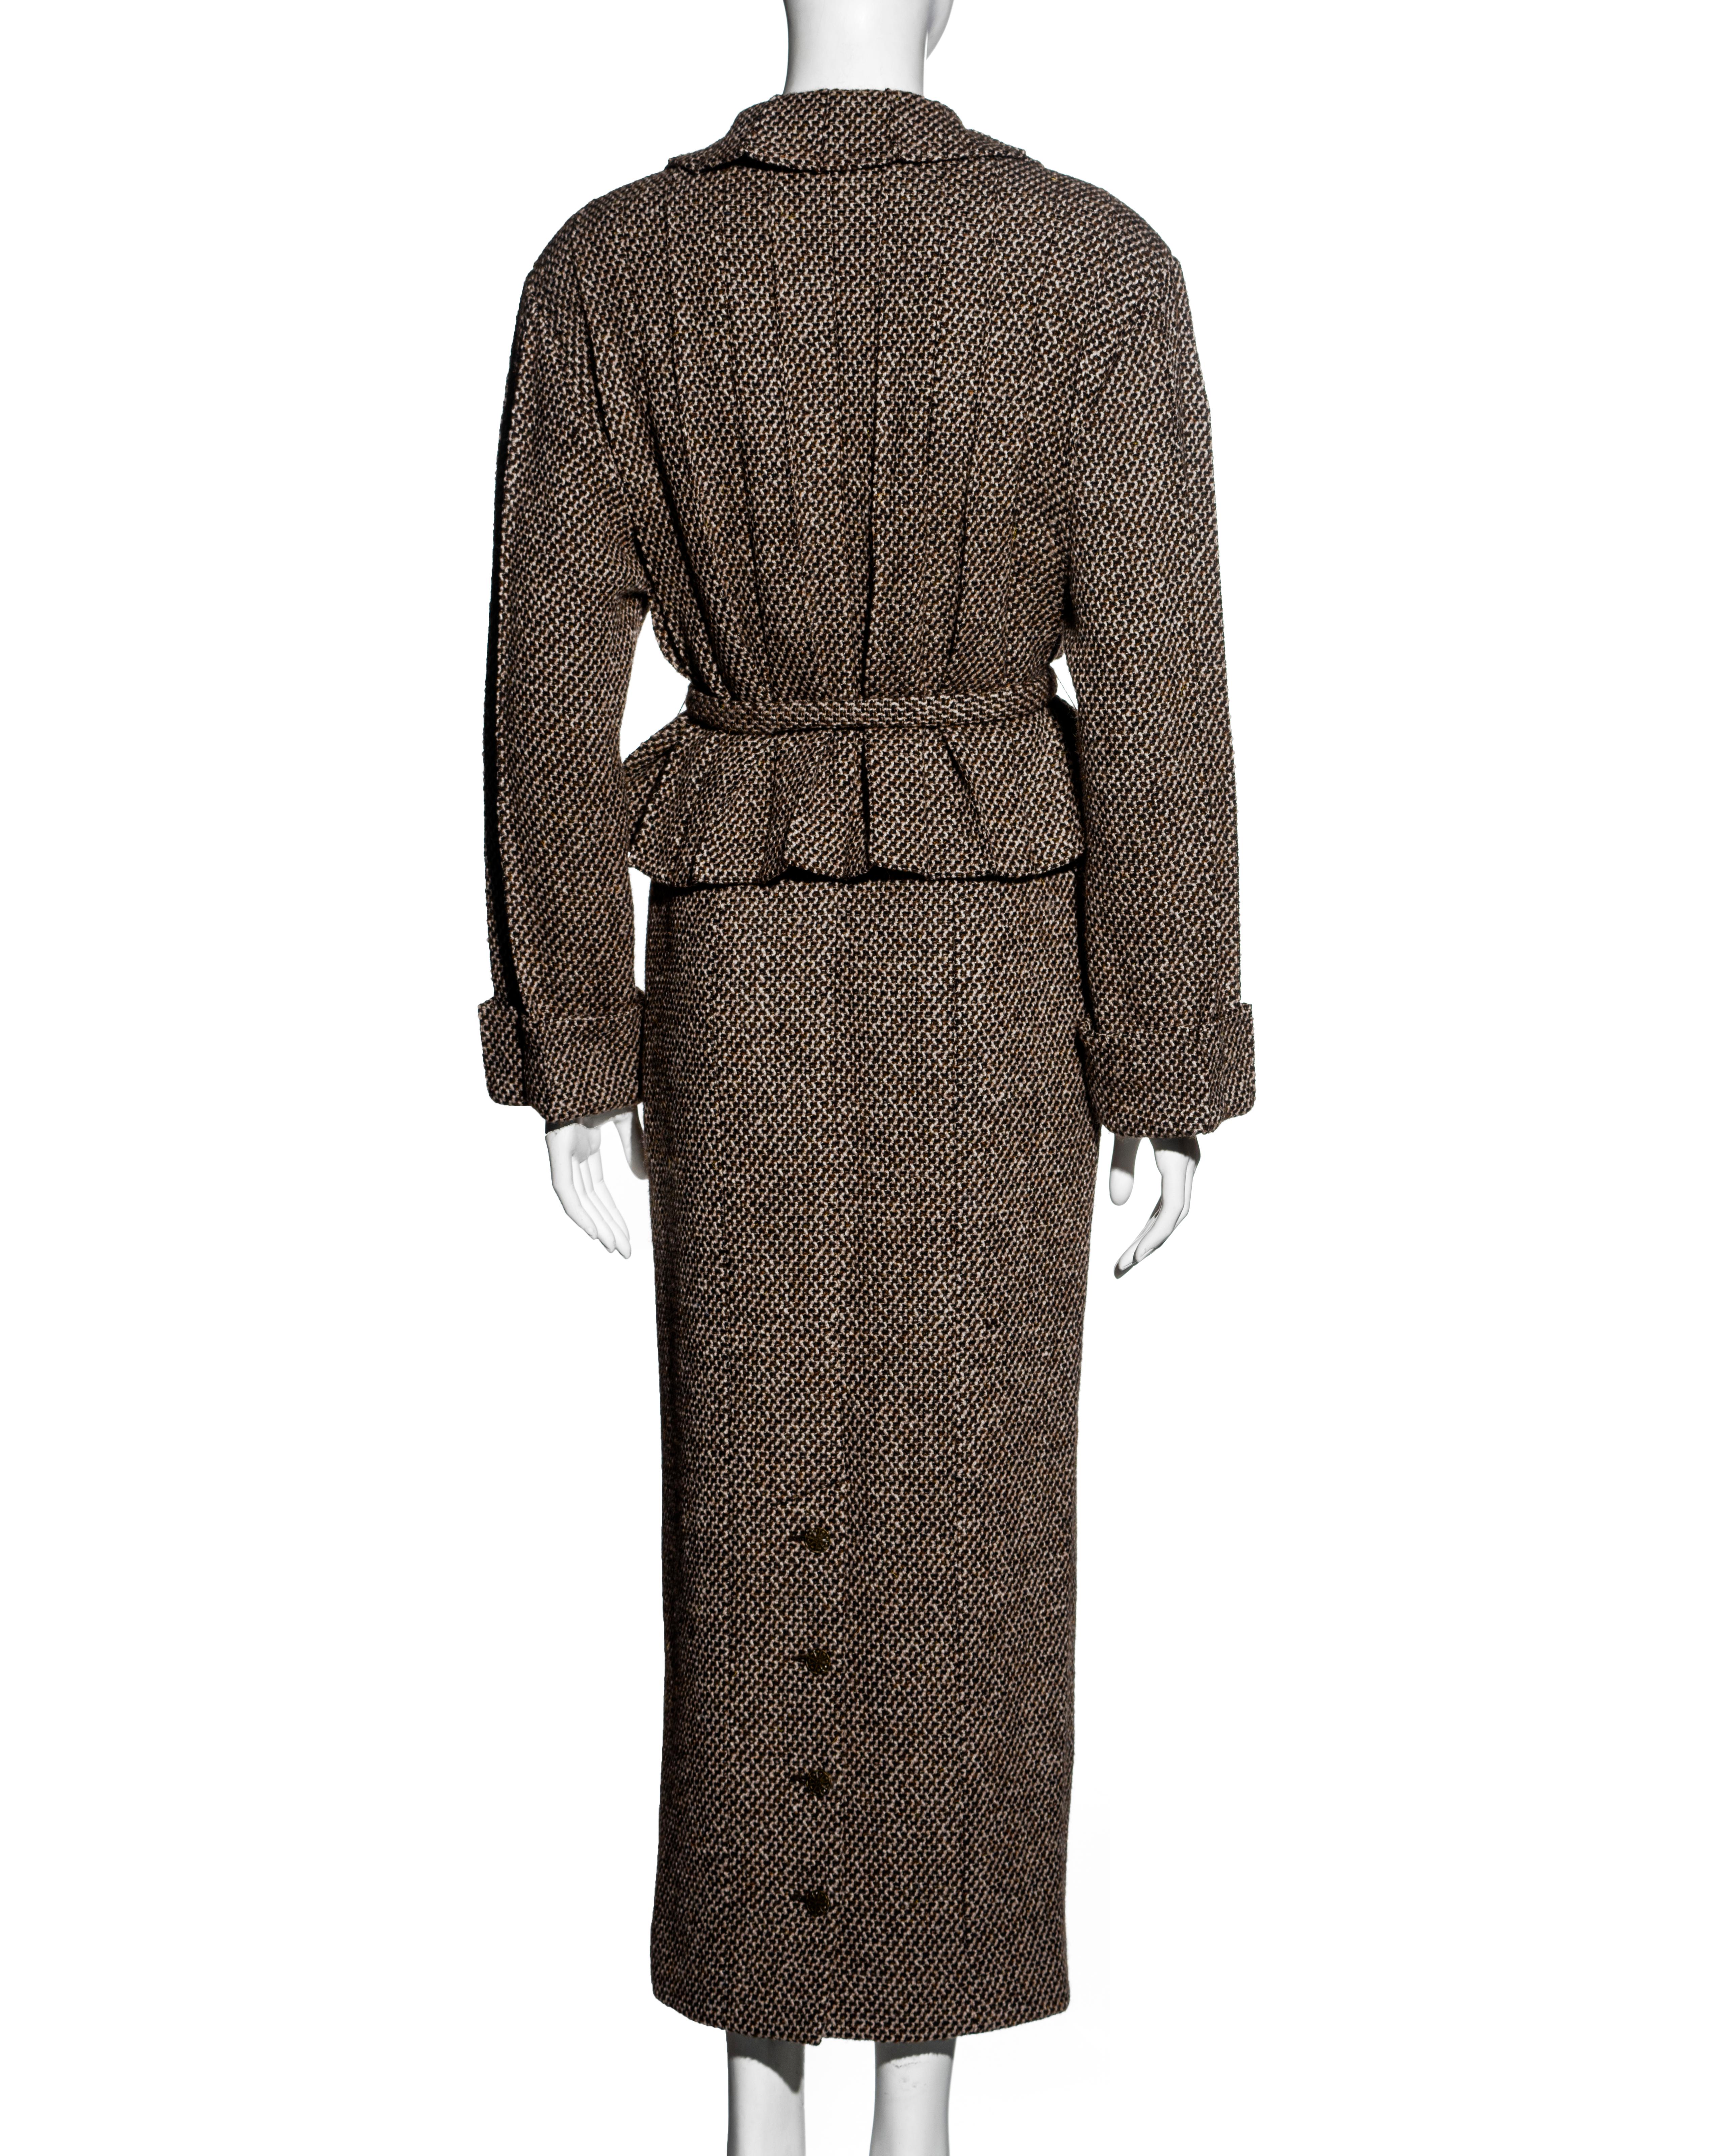 Chanel by Karl Lagerfeld brown tweed pleated jacket maxi skirt suit, fw 1998 For Sale 2